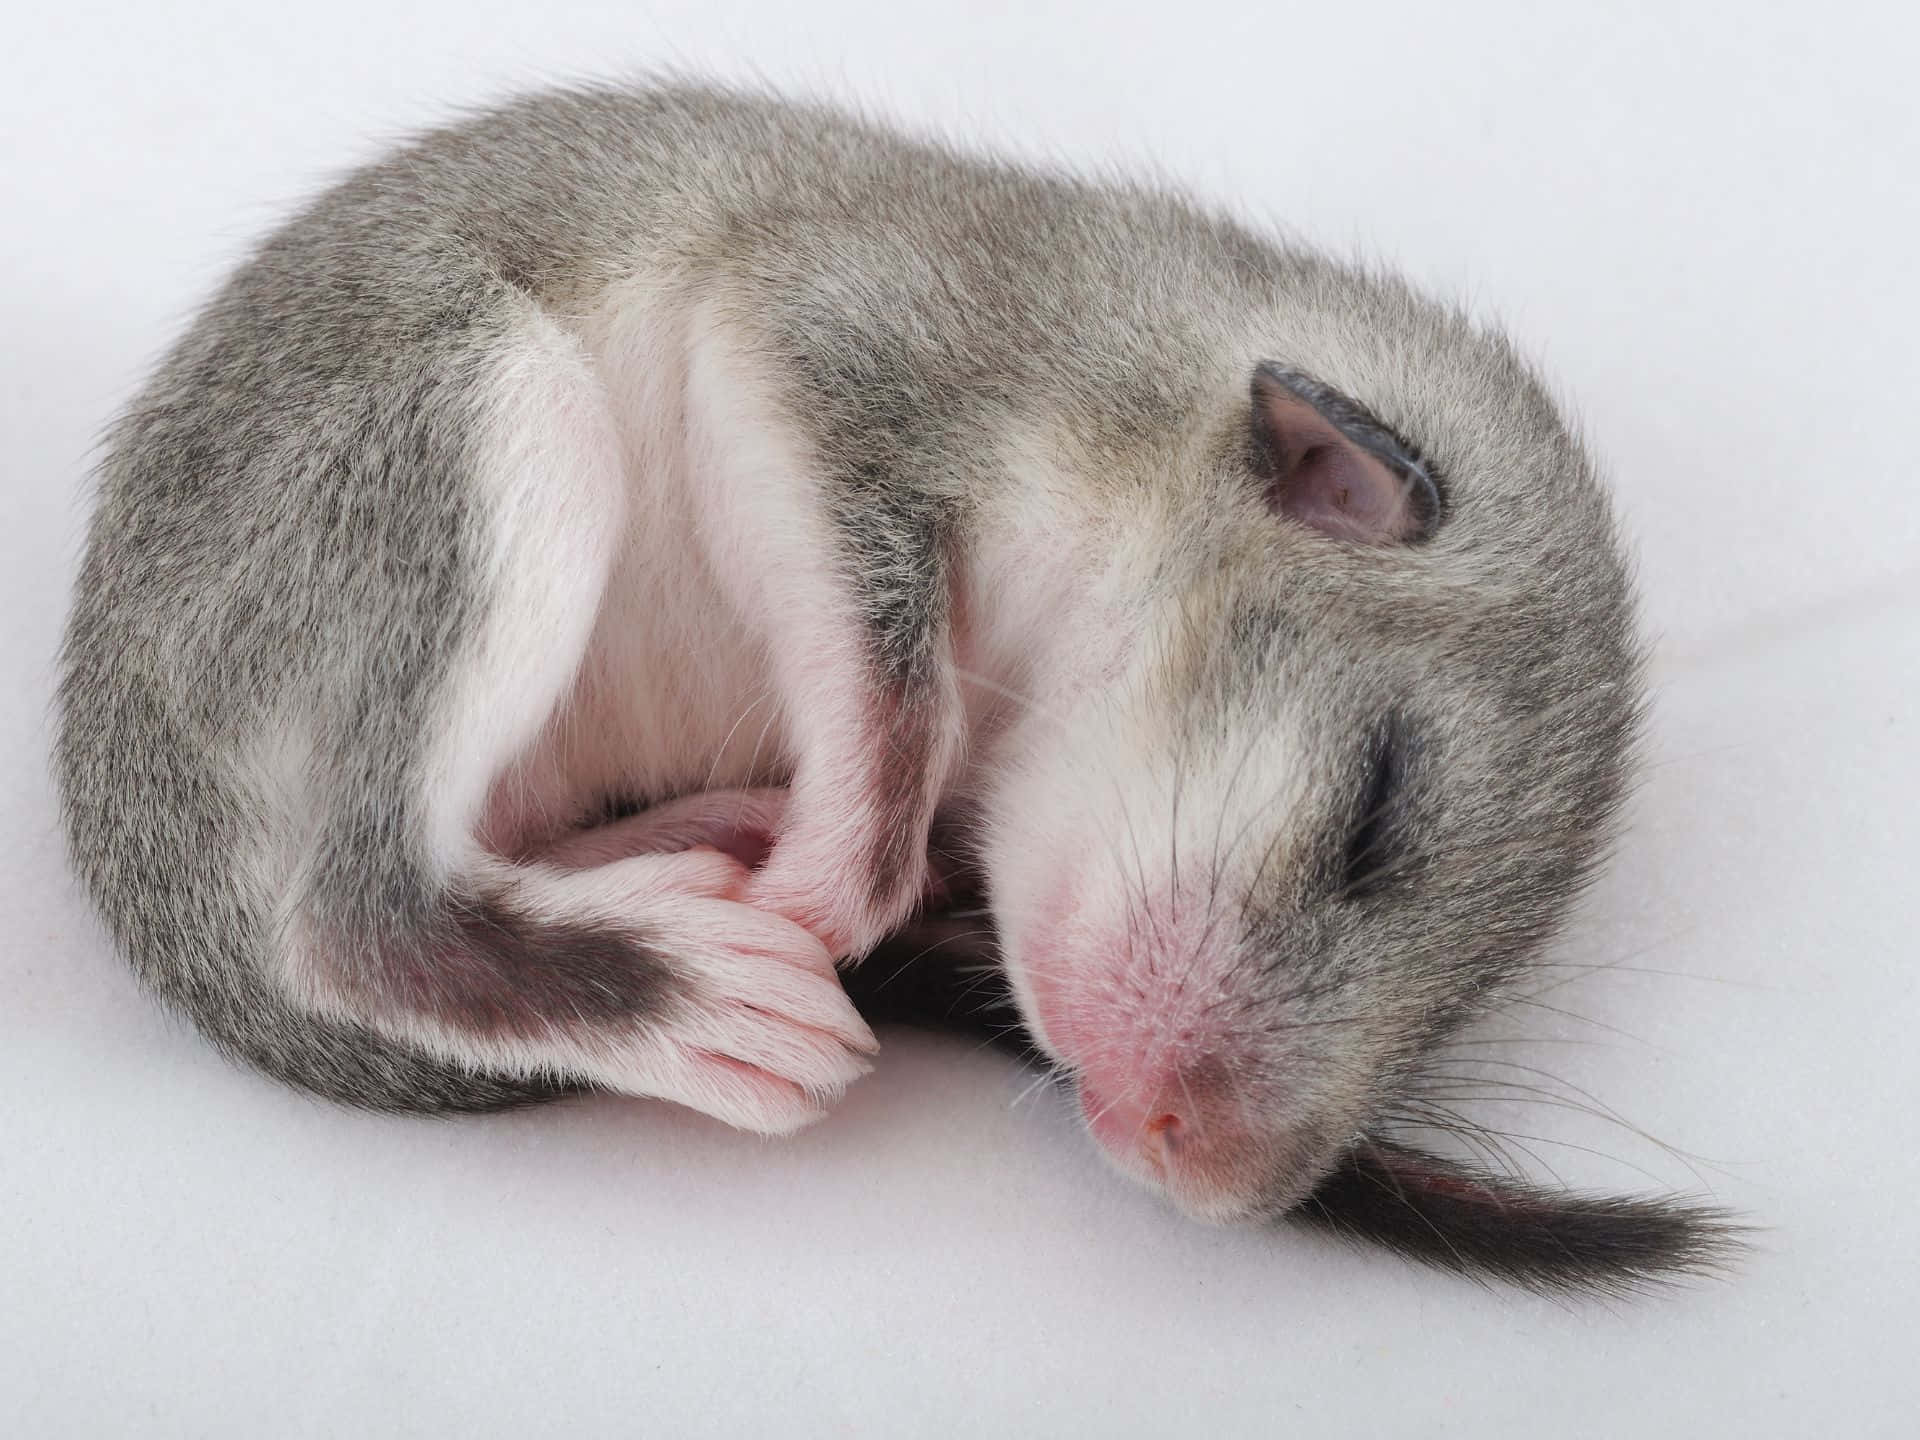 Sleeping Dormouse Curled Up Wallpaper